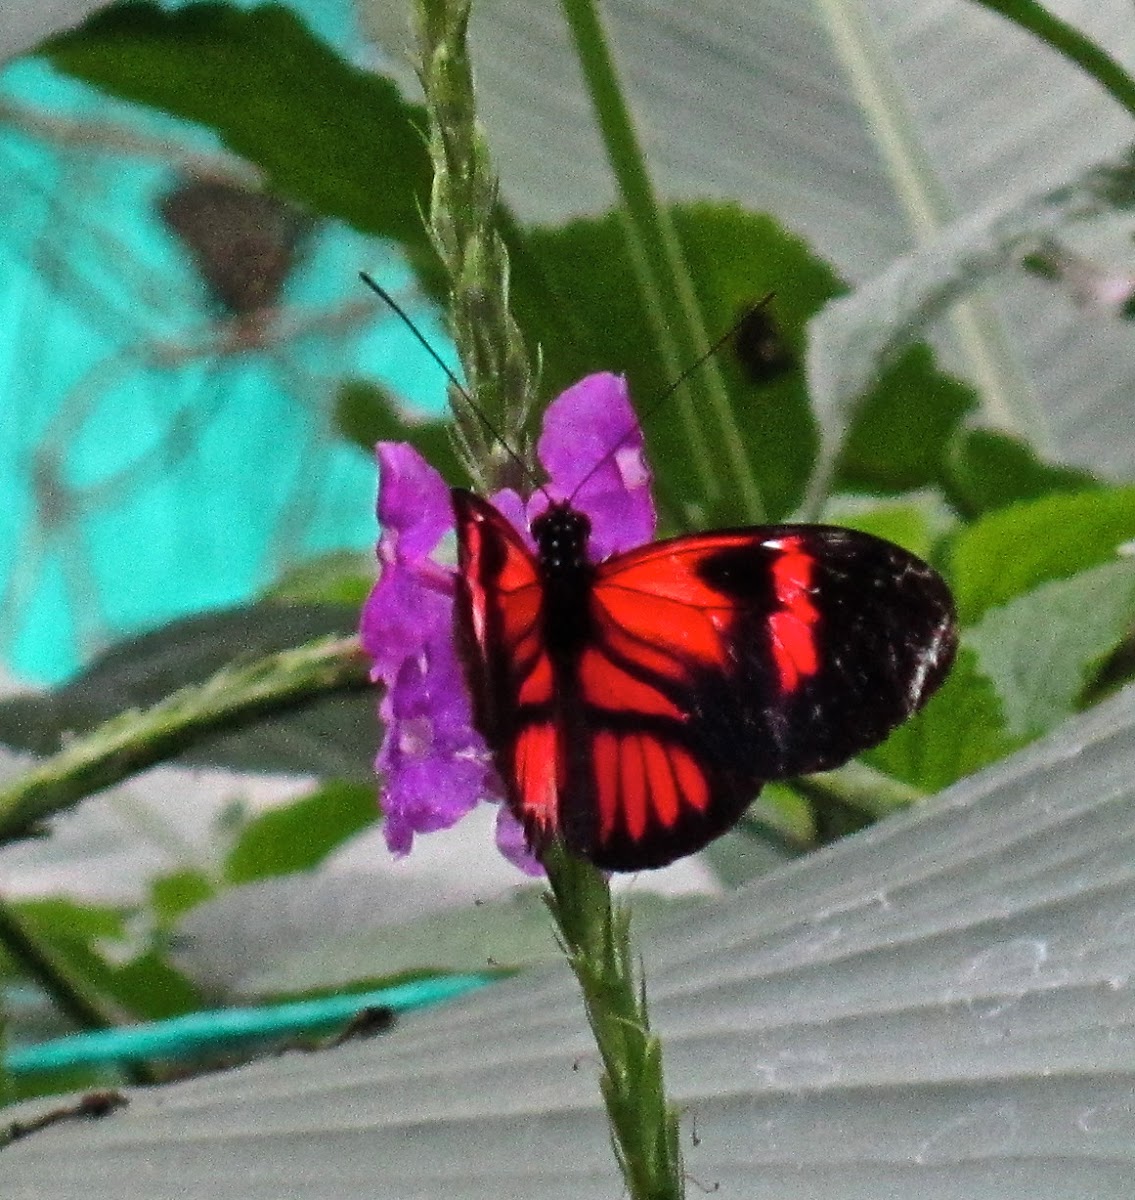 A type of heliconius butterfly